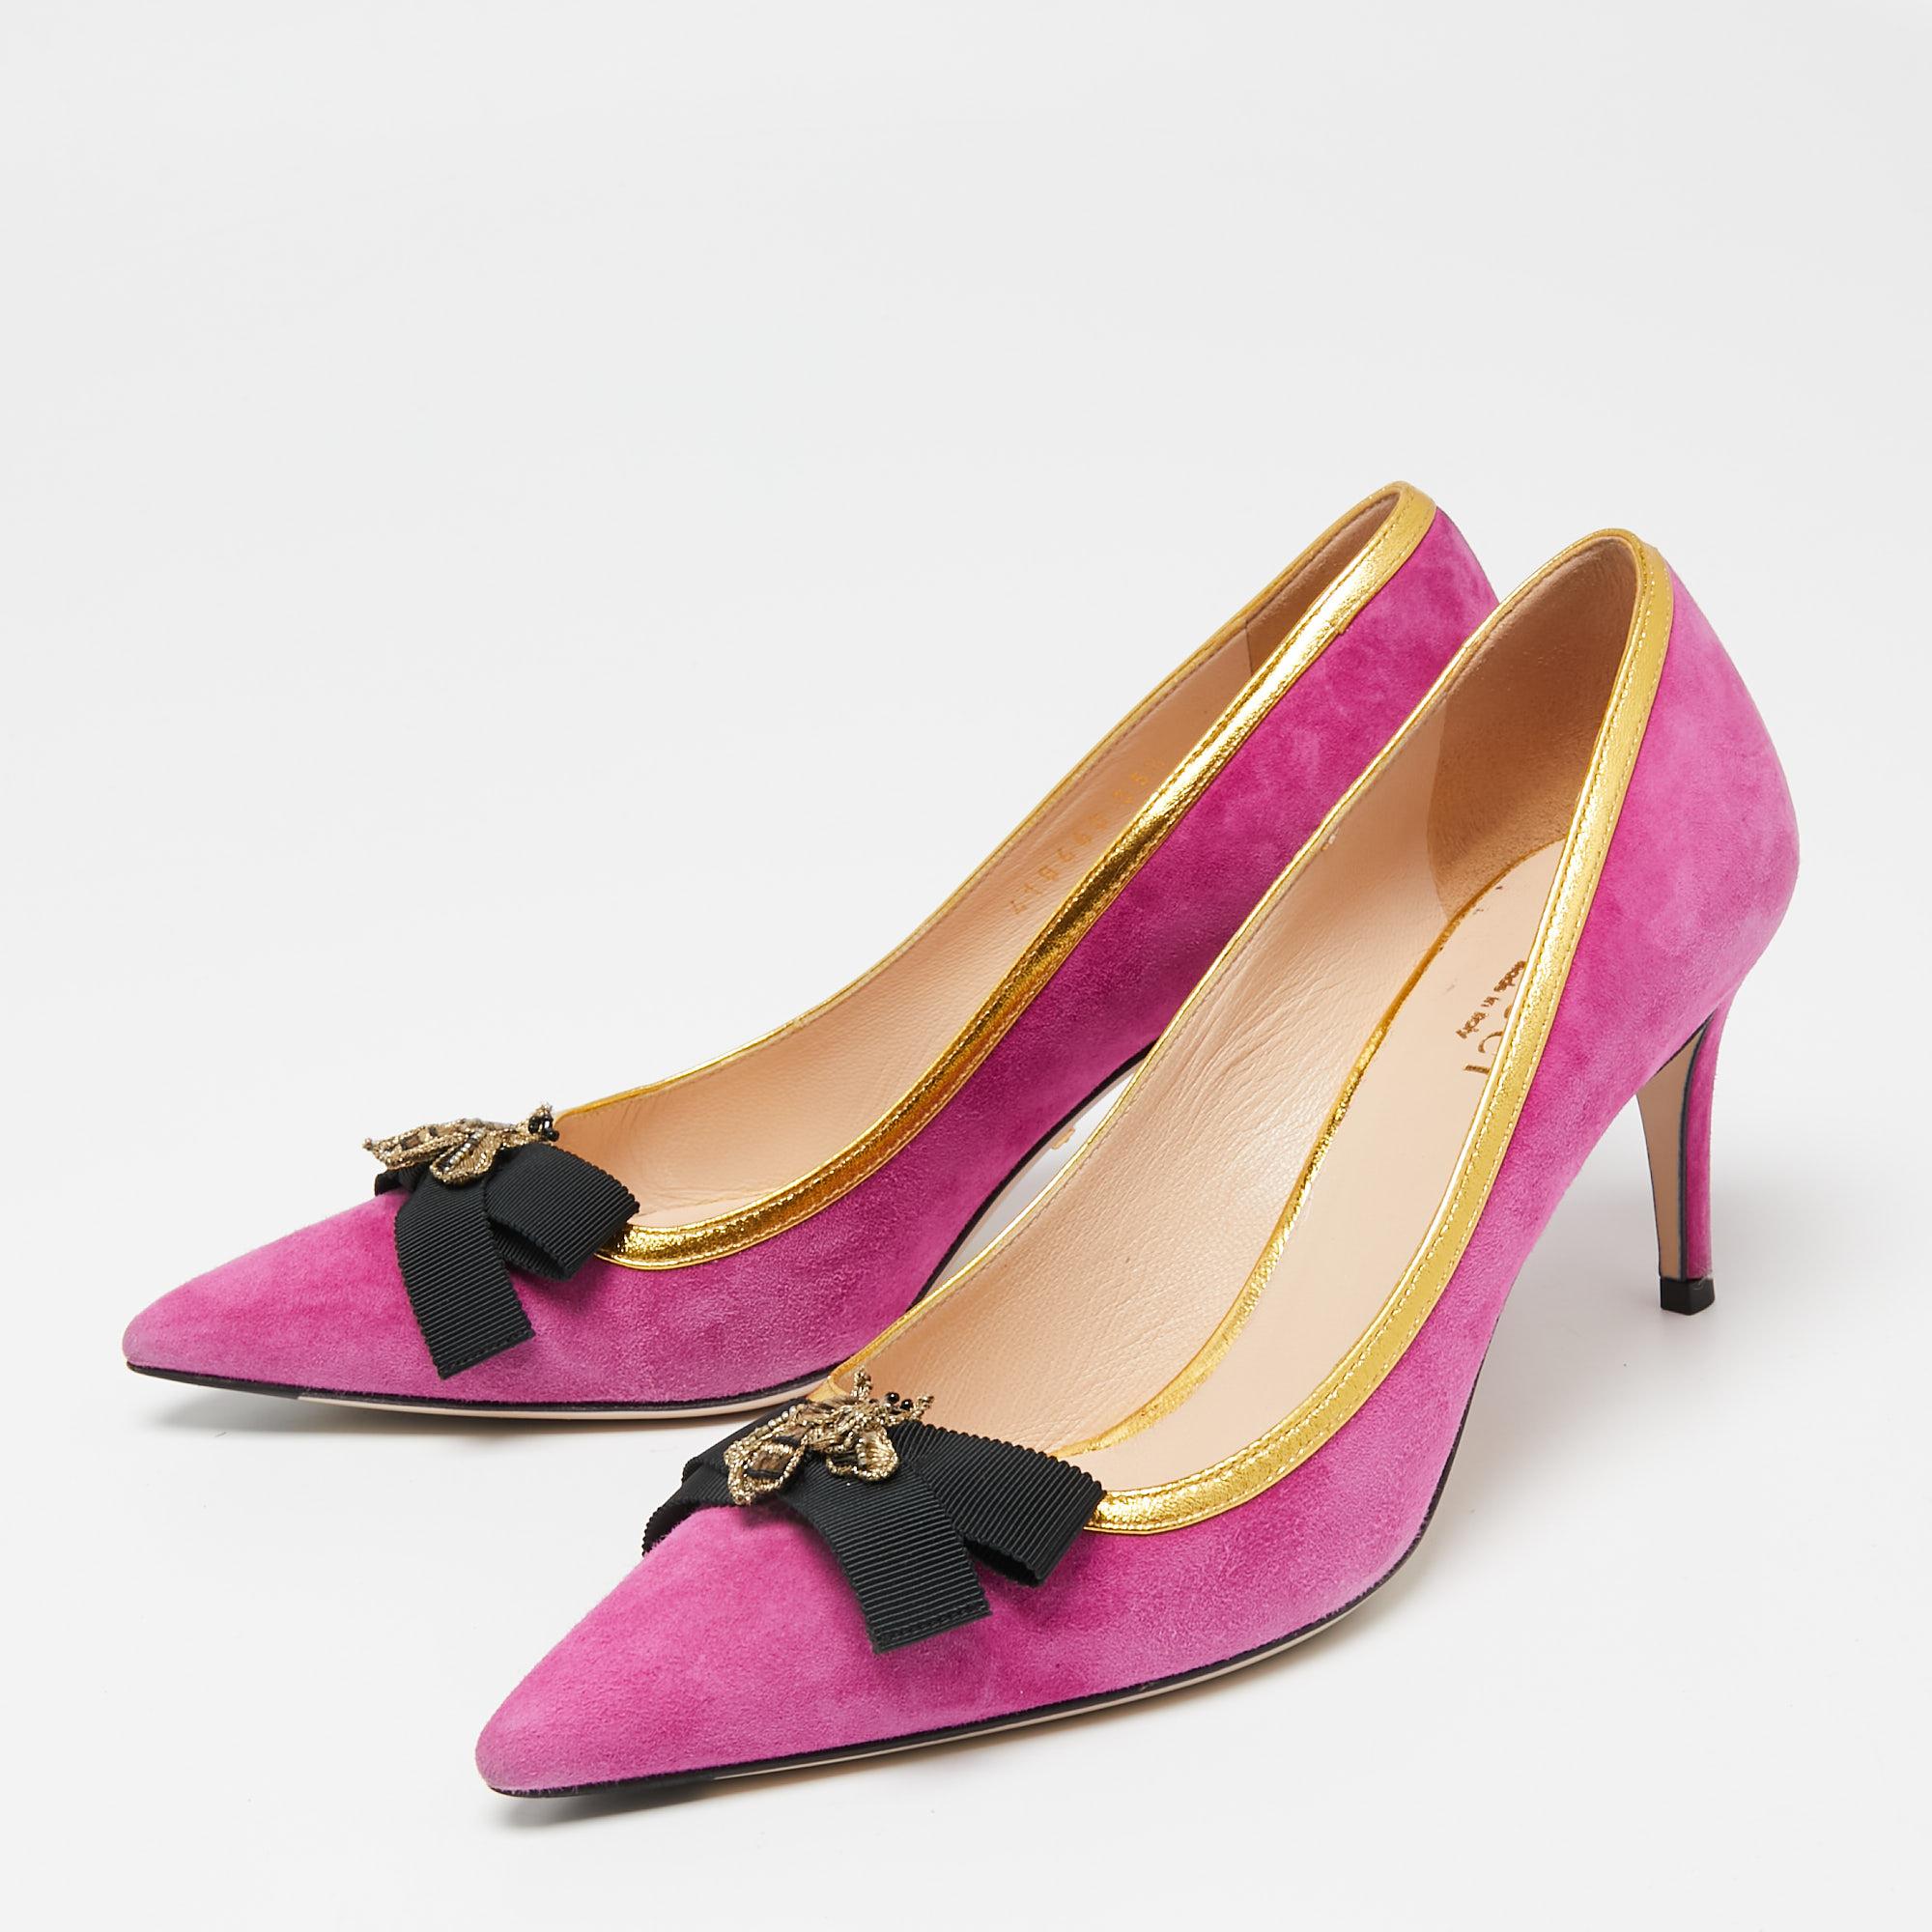 Gucci's artistic aesthetic combined with attractive hues brings you these gorgeous Moody Bee pumps. Crafted from magenta-gold suede and leather, a decorative Bee motif is placed on the pointed toes. They are elevated on 7 cm heels. For a classy